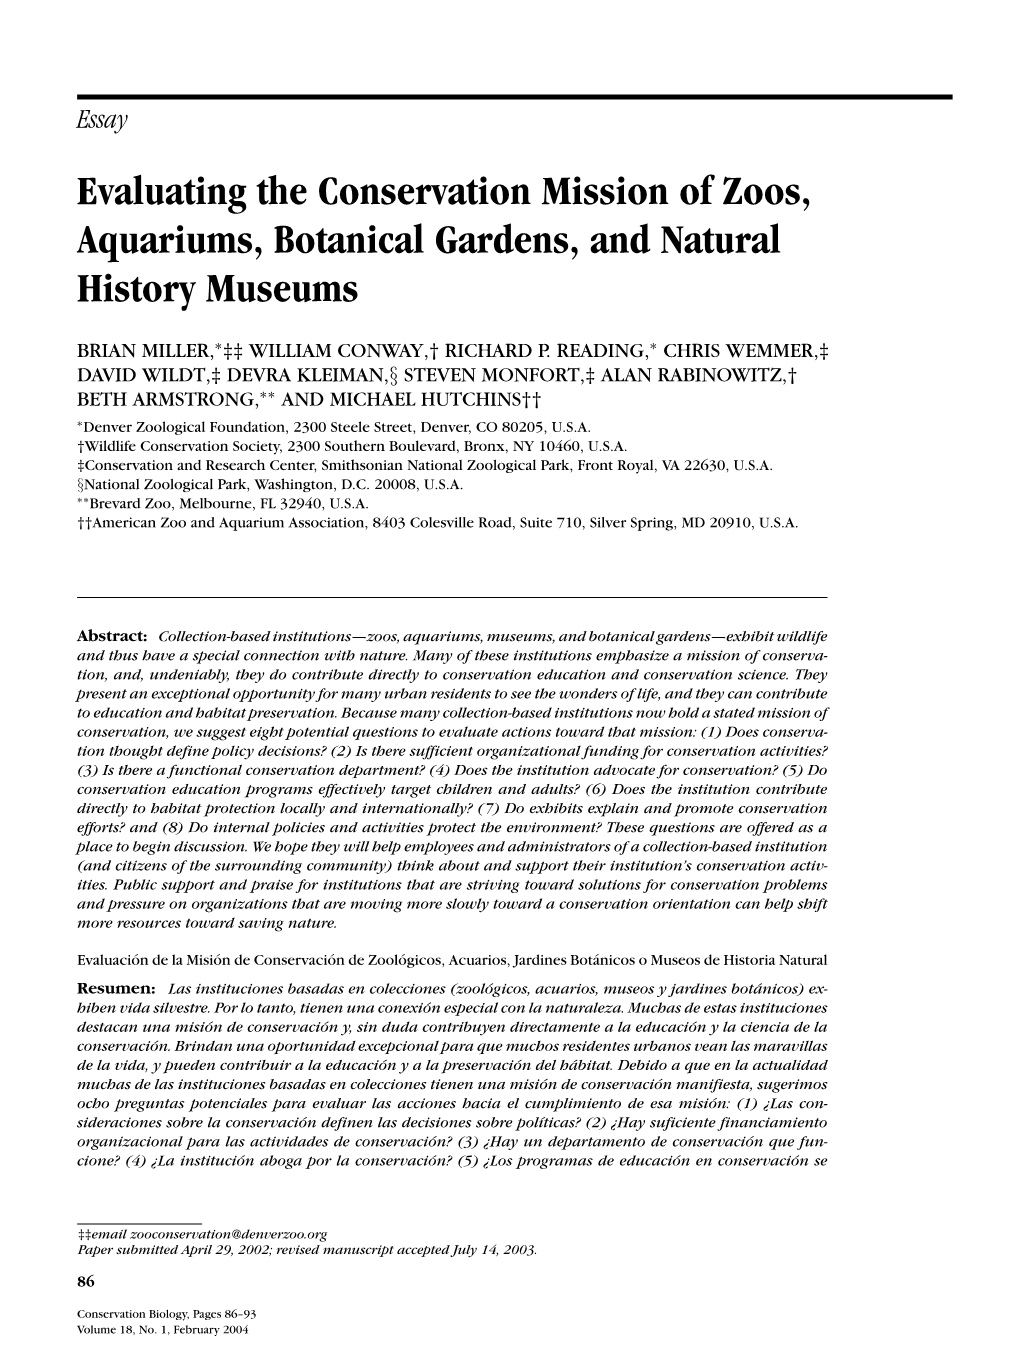 Evaluating the Conservation Mission of Zoos, Aquariums, Botanical Gardens, and Natural History Museums